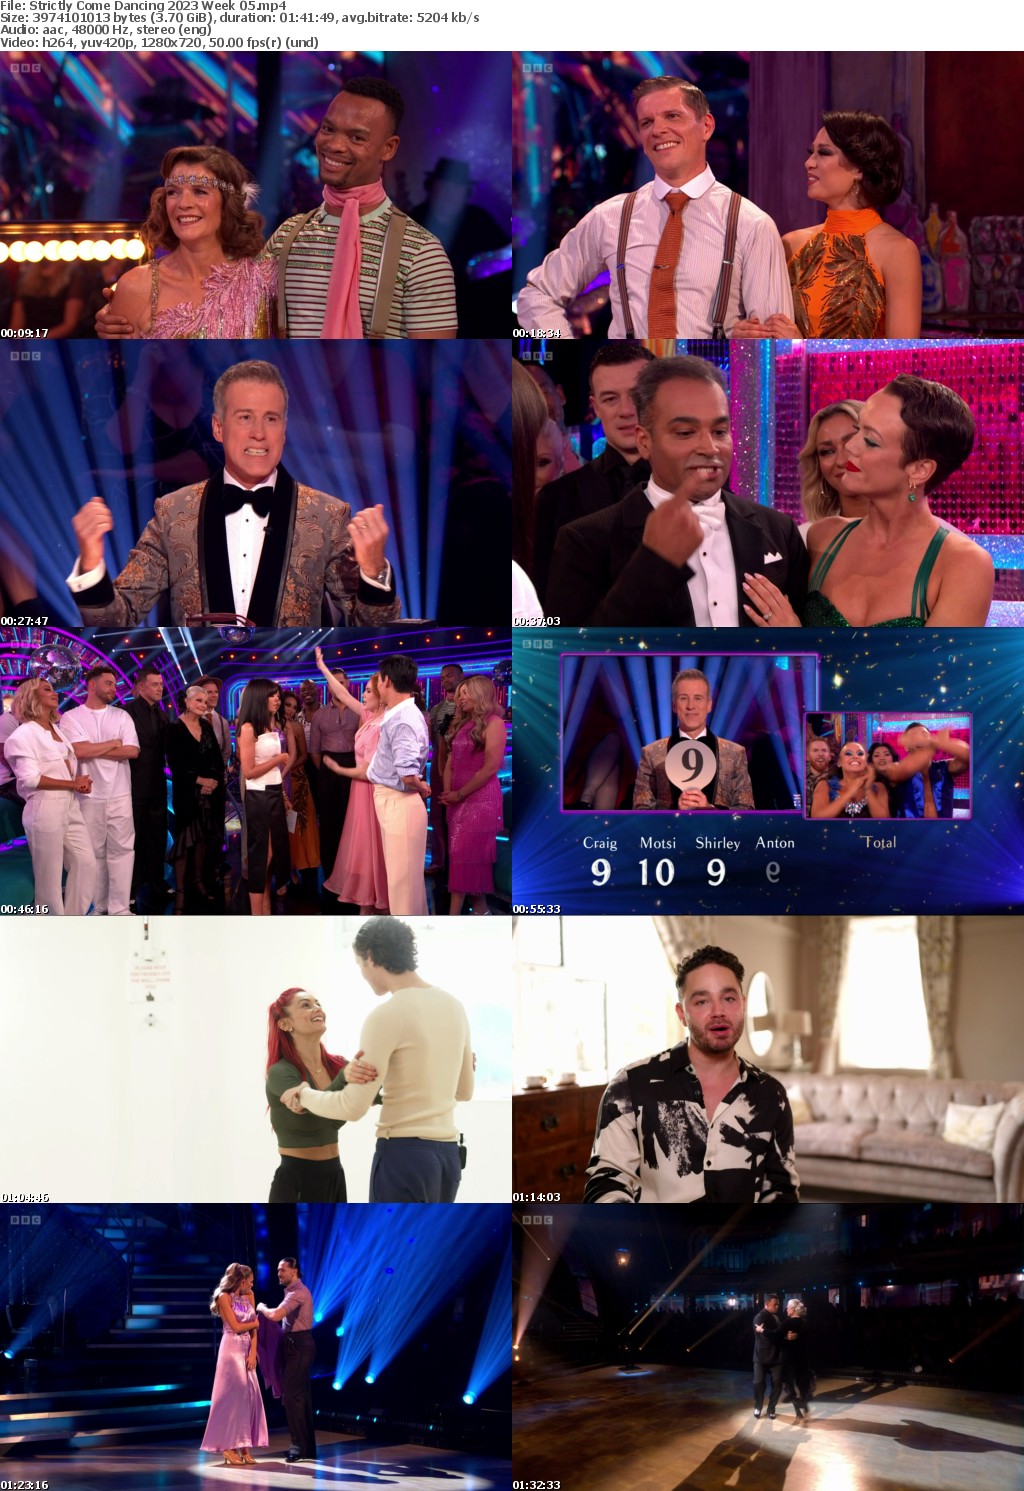 Strictly Come Dancing 2023 Week 05 (1280x720p HD, 50fps, soft Eng subs)